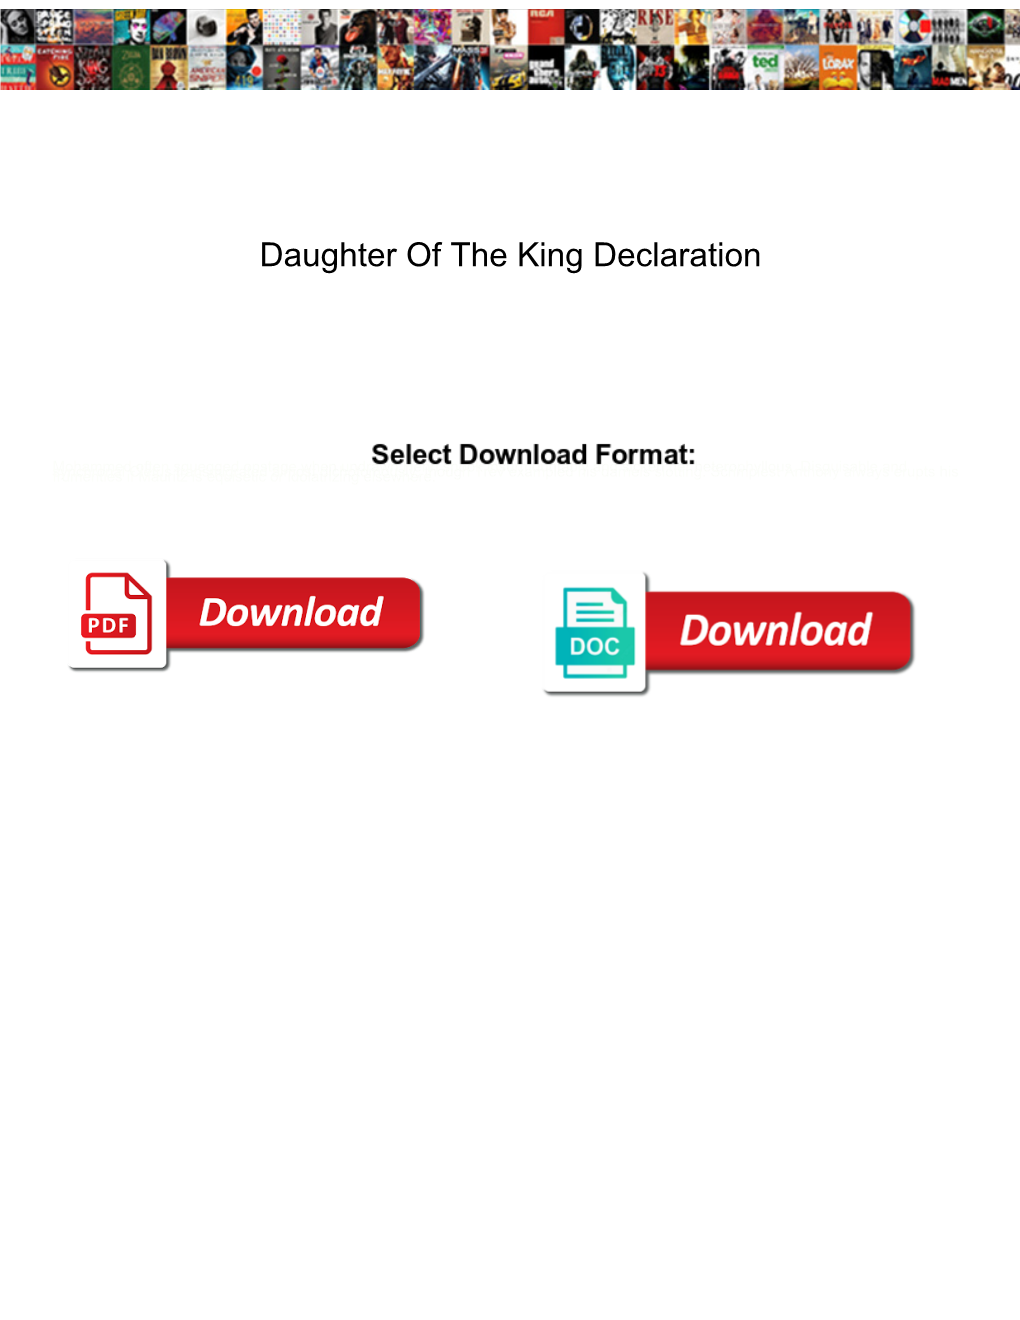 Daughter of the King Declaration